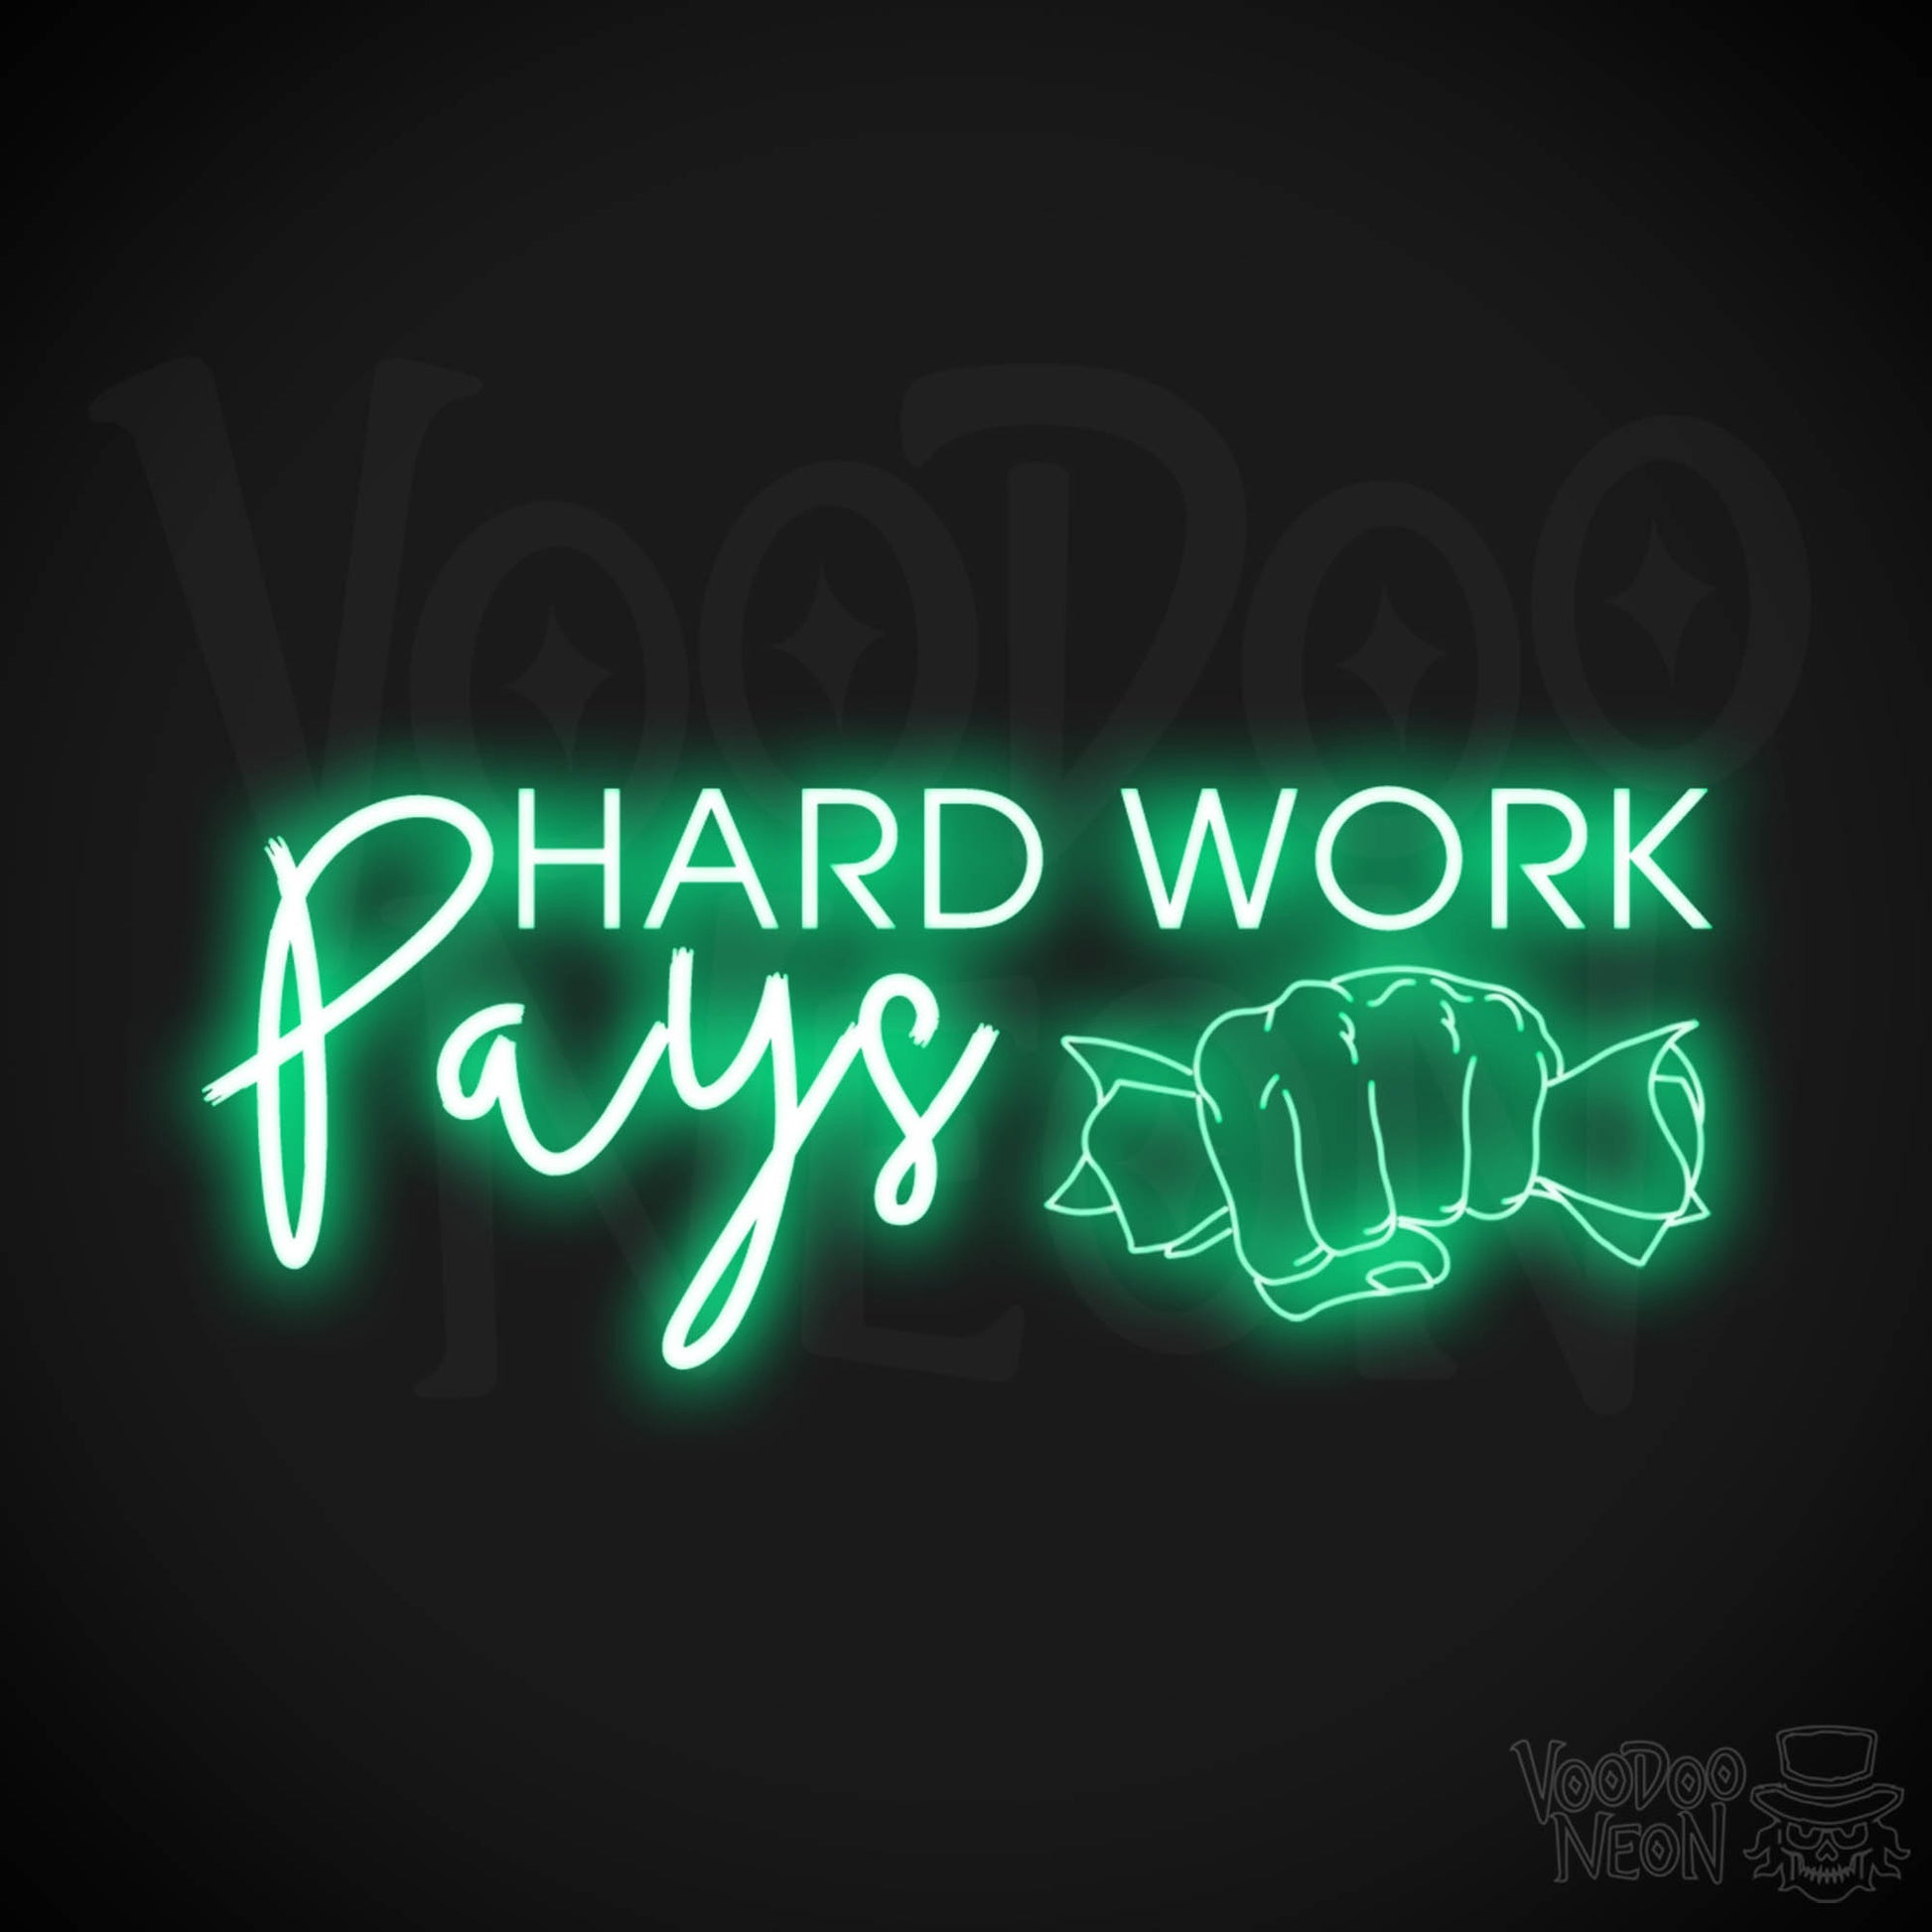 Hard Work Pays Neon Sign - LED Neon Wall Art - Color Green